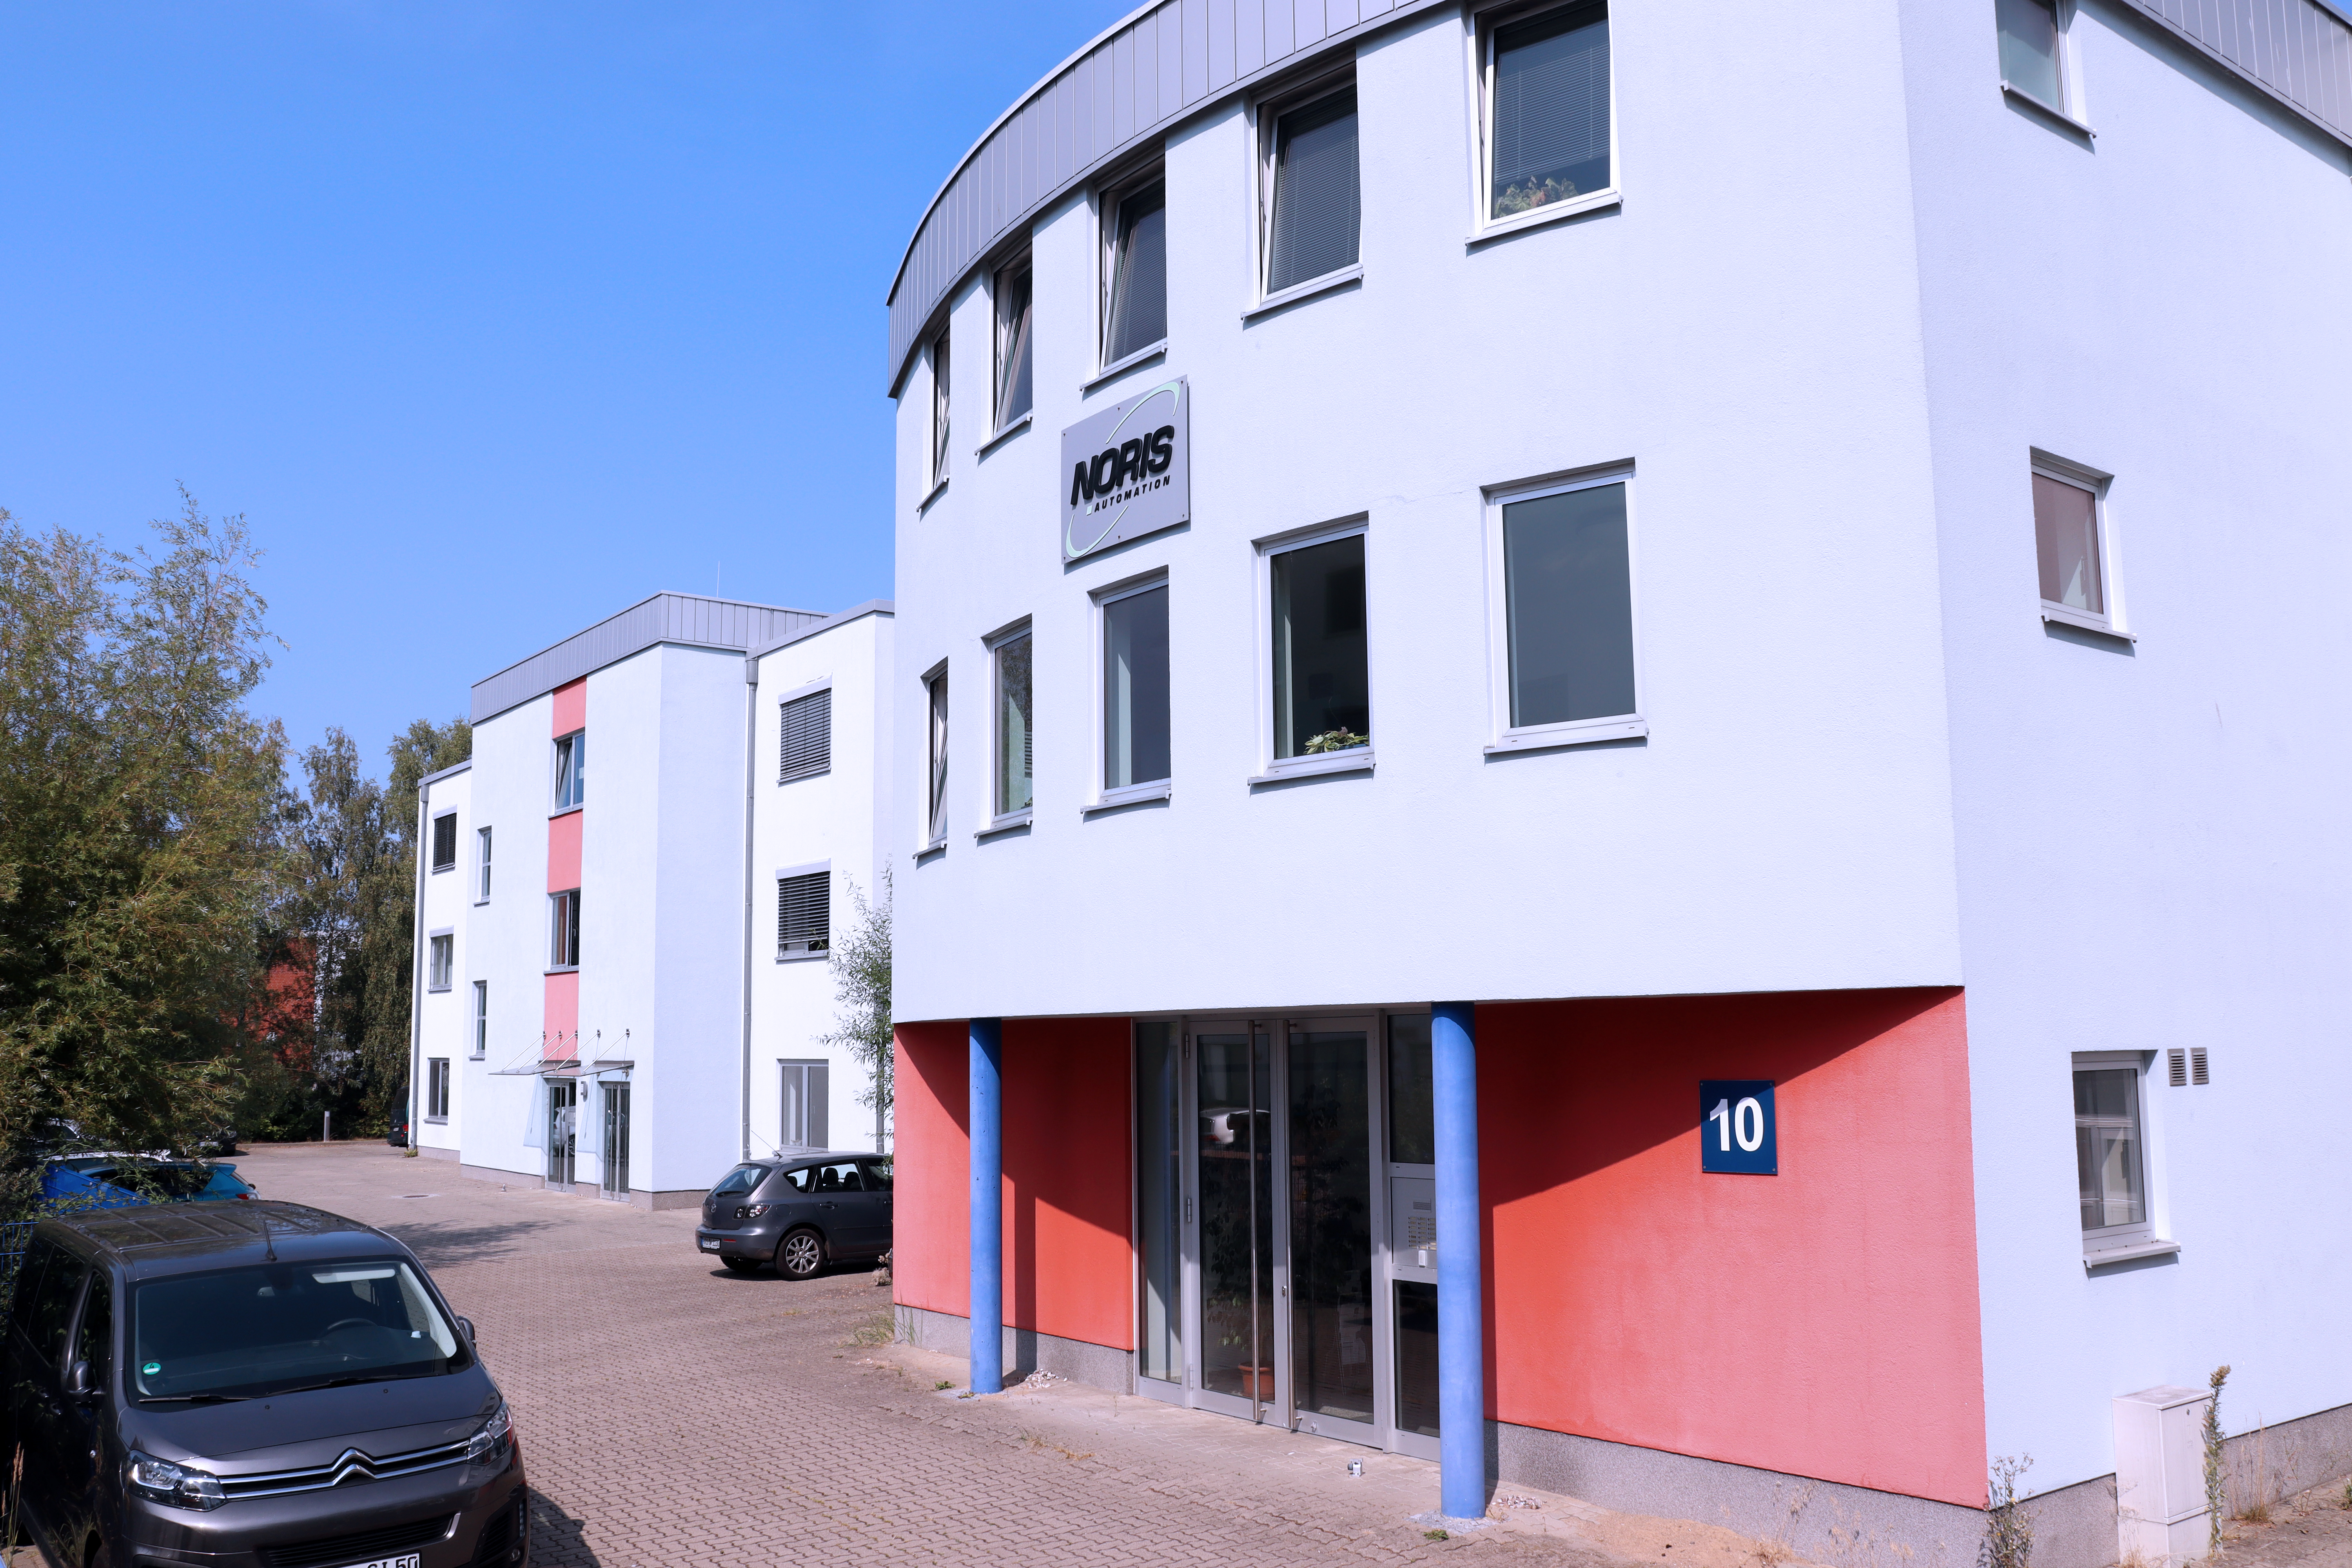 The image shows the company buildings of Noris Automation Rostock